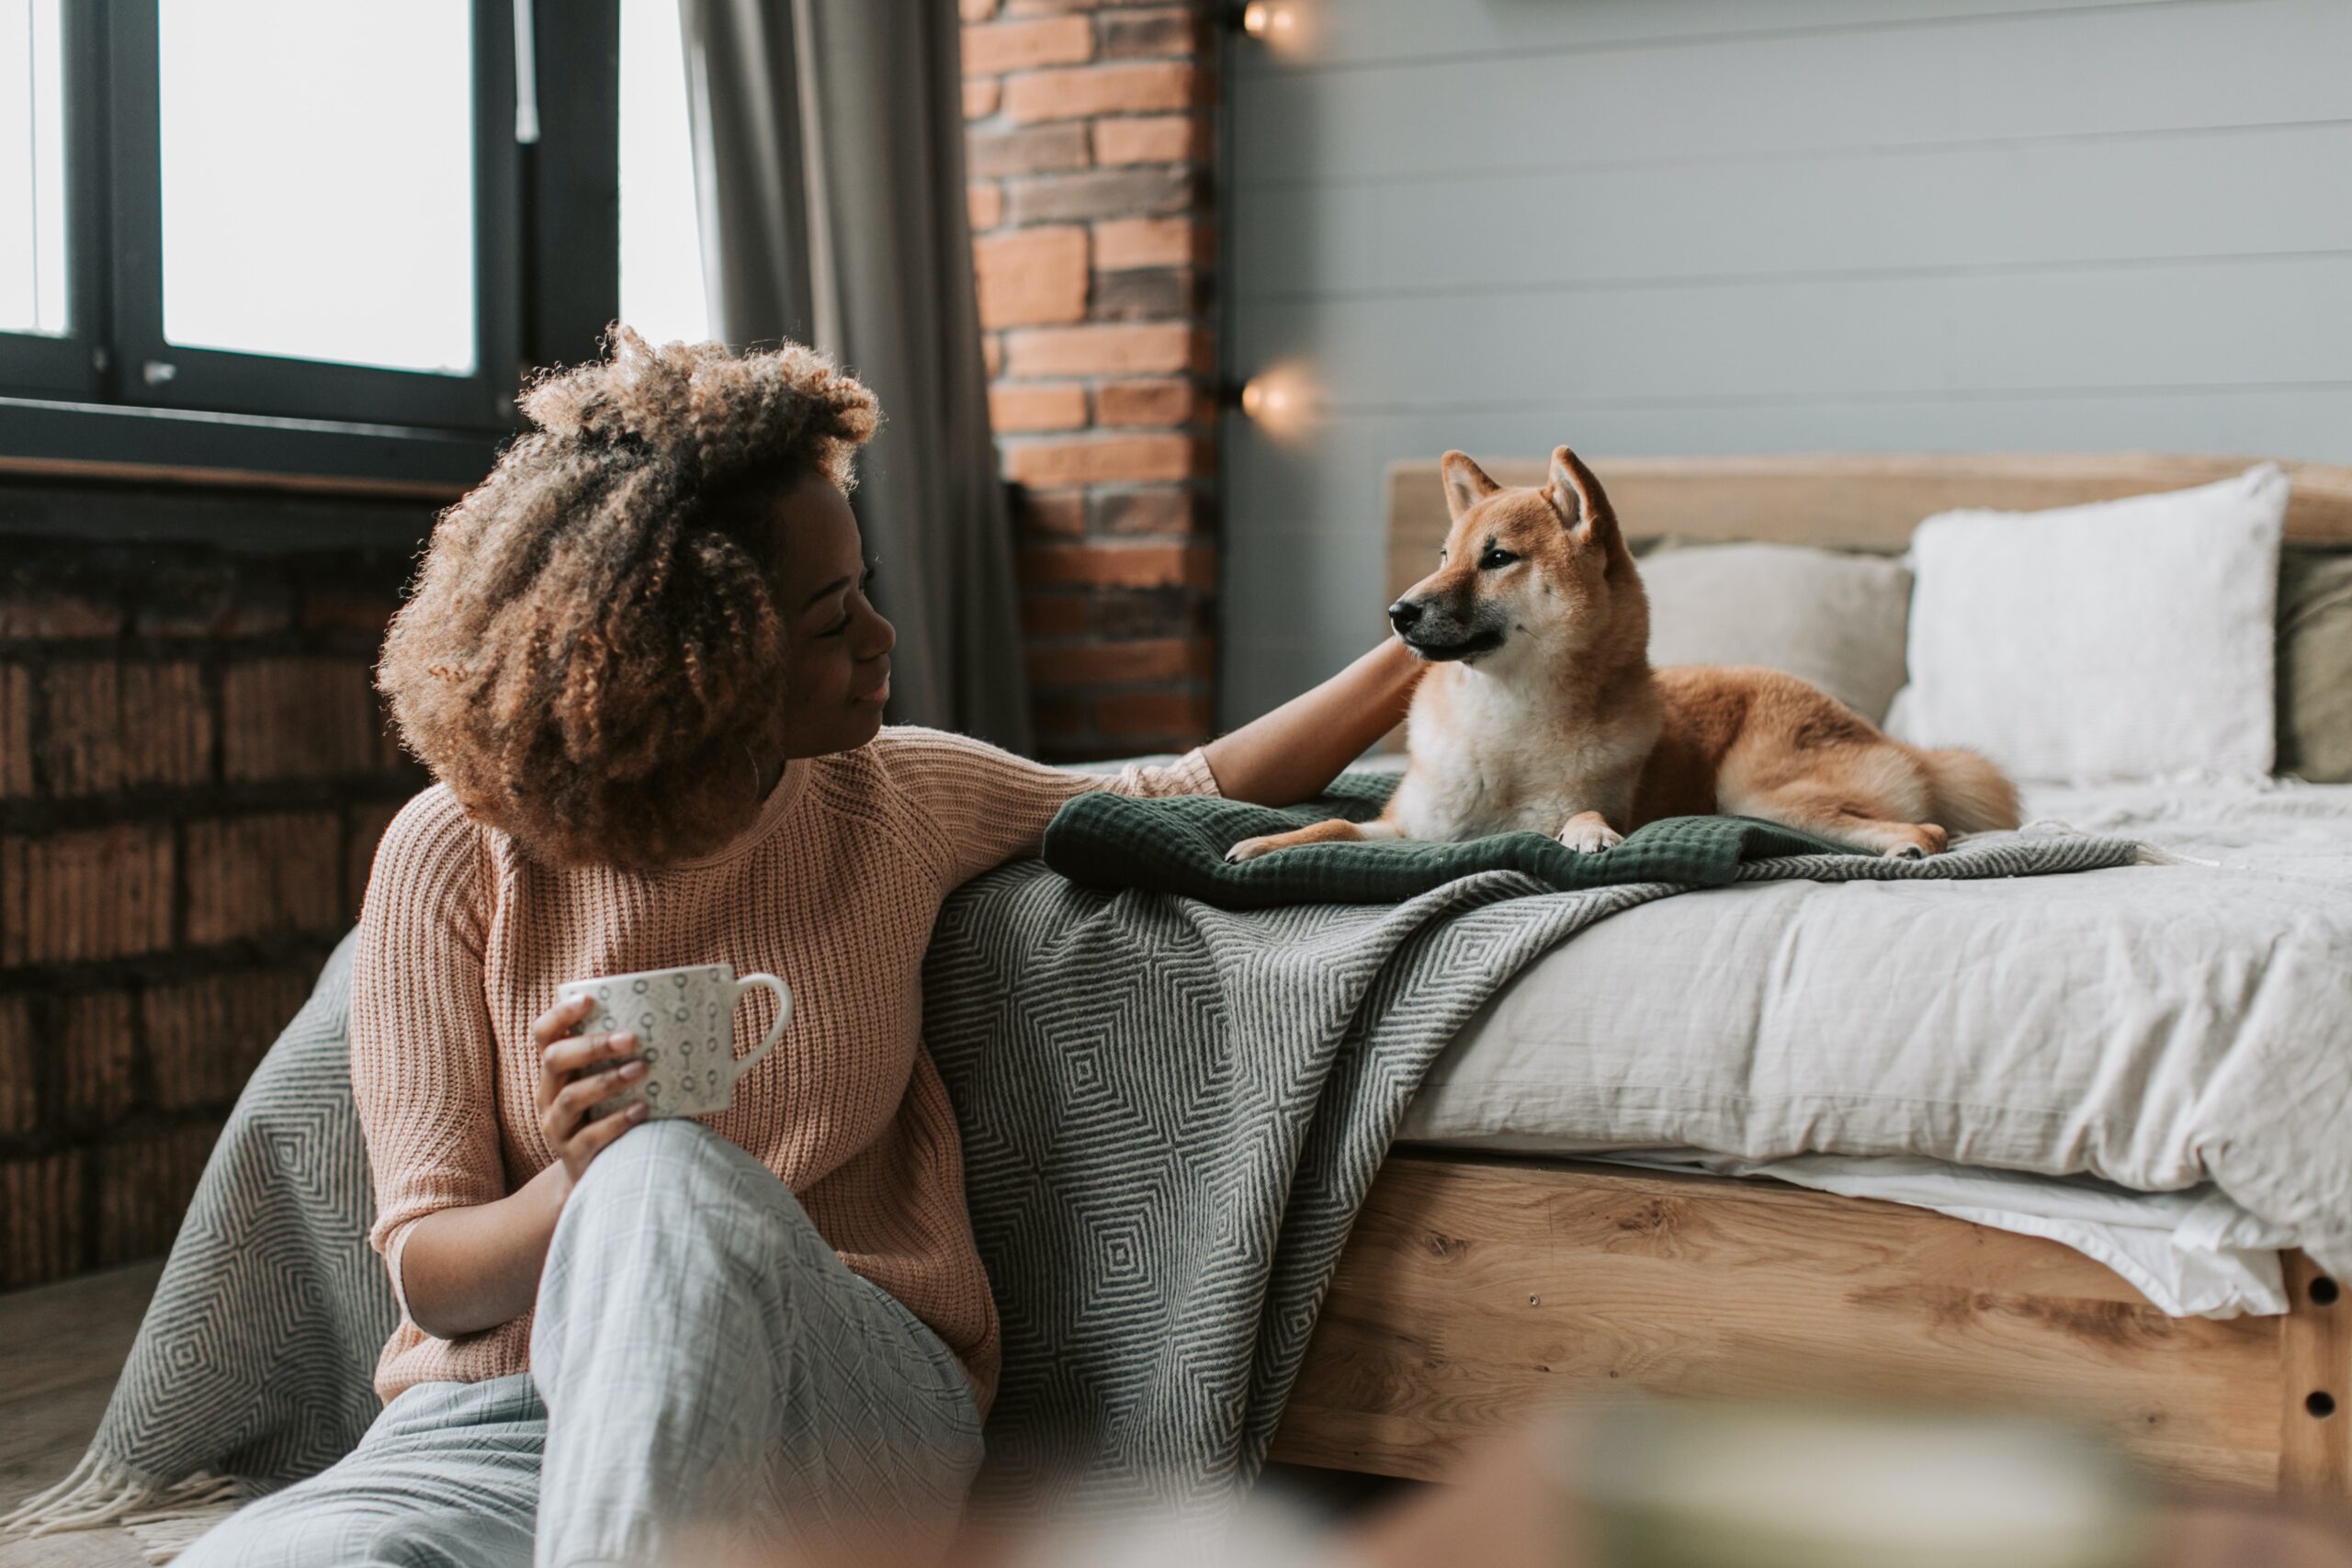 Woman in a relaxing bedroom with her dog